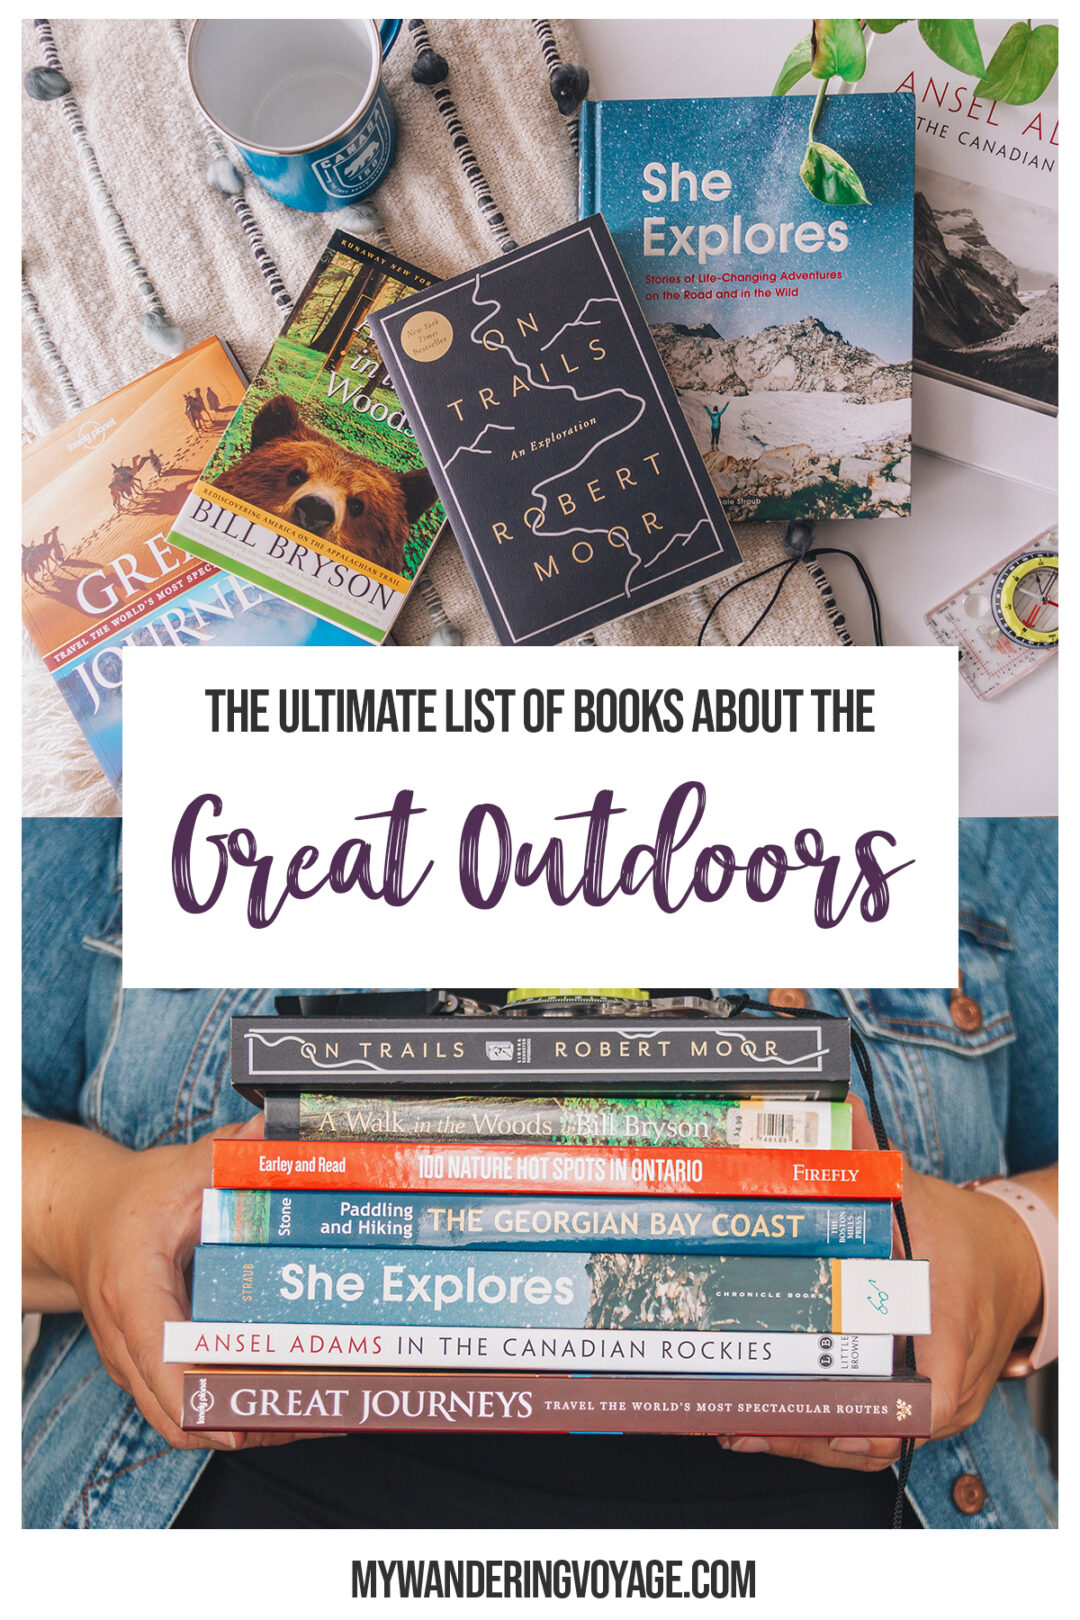 The Best Nature Books for your Next Adventure in the Great Outdoors